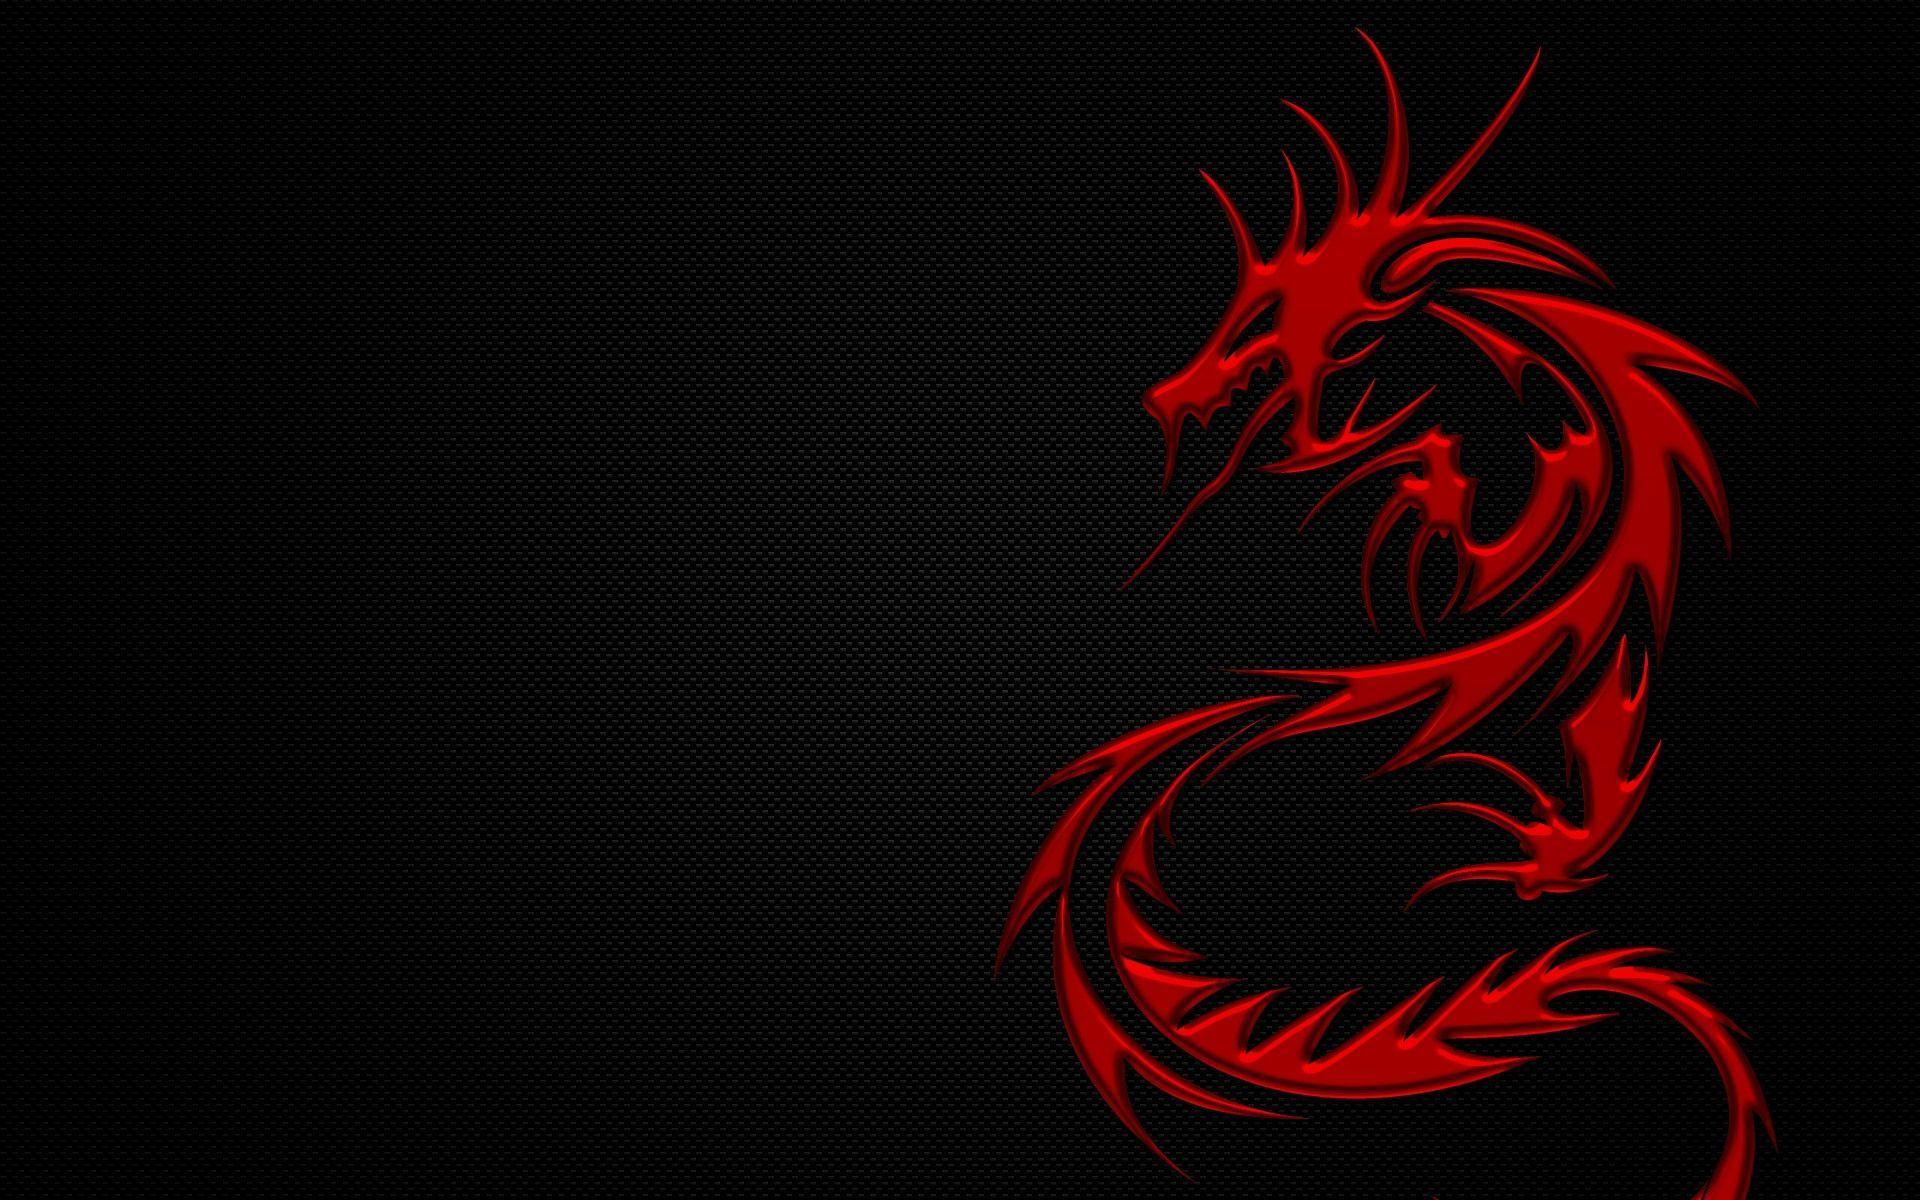 About Red Dragons Red Dragon